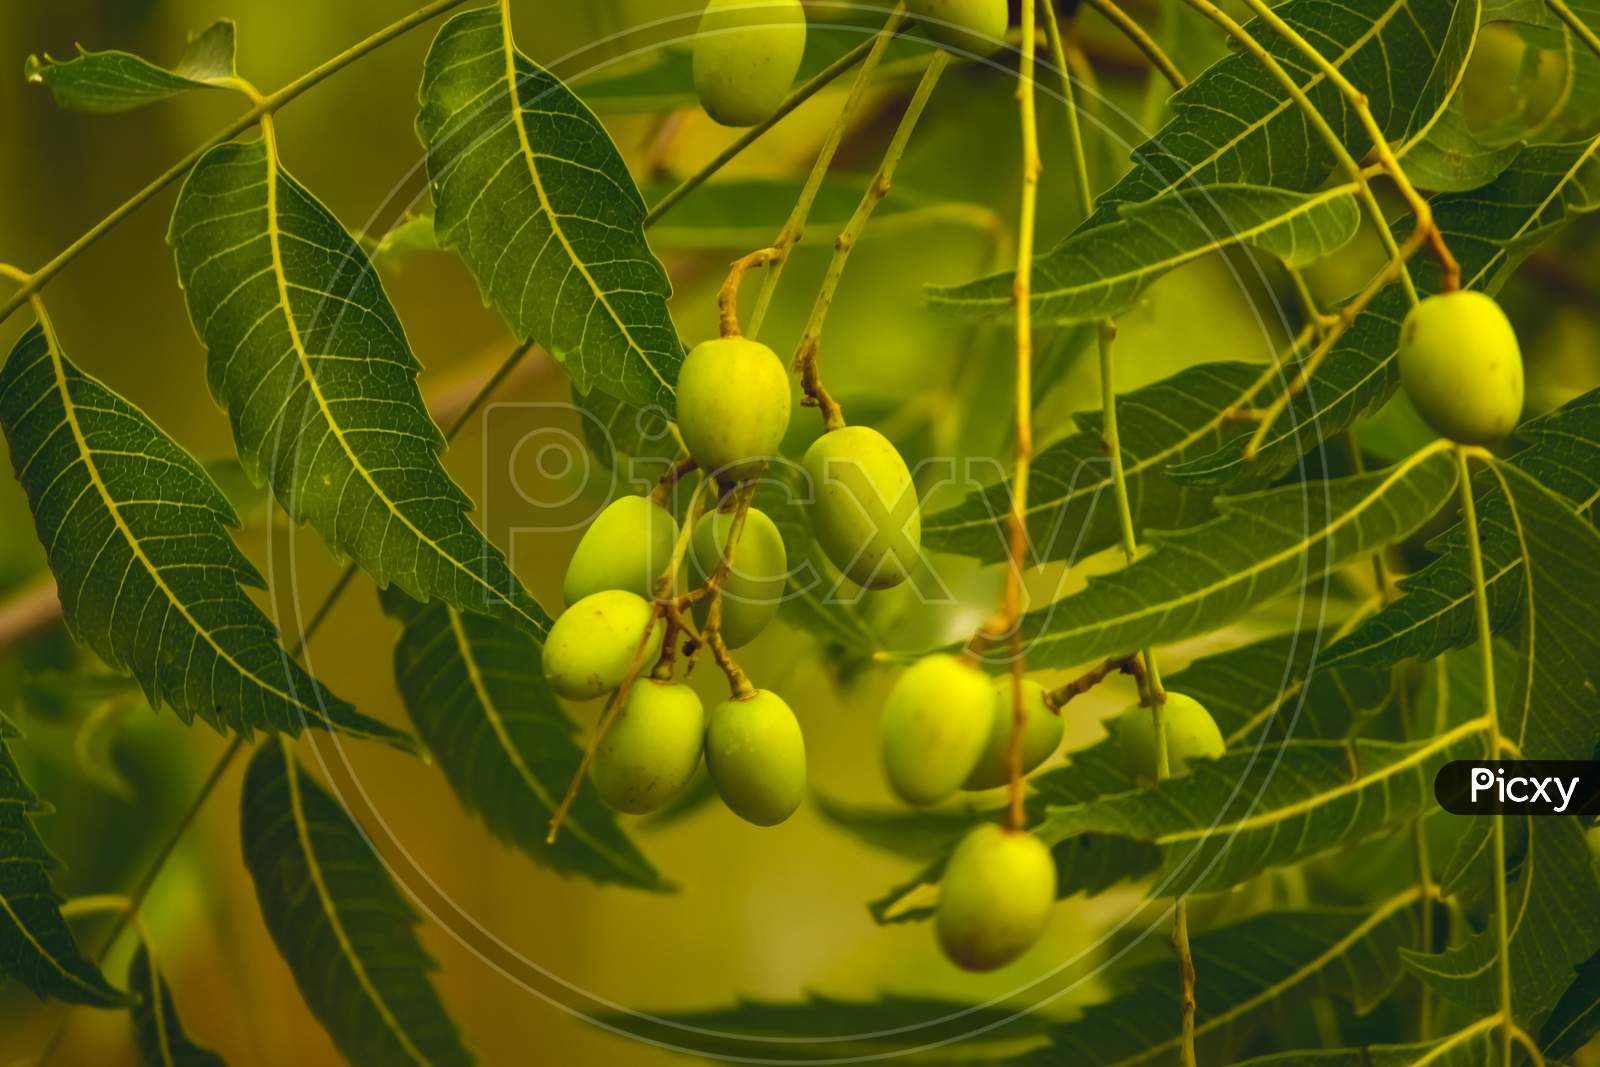 Fresh Neem Fruit On Tree With Leaf On Nature Background. A Leaves Of Neem Tree And Fruits Growing Natural Medicinal. Azadirachta Indica,Neem, Nimtree Or Indian Lilac,Mahogany Family Meliaceae